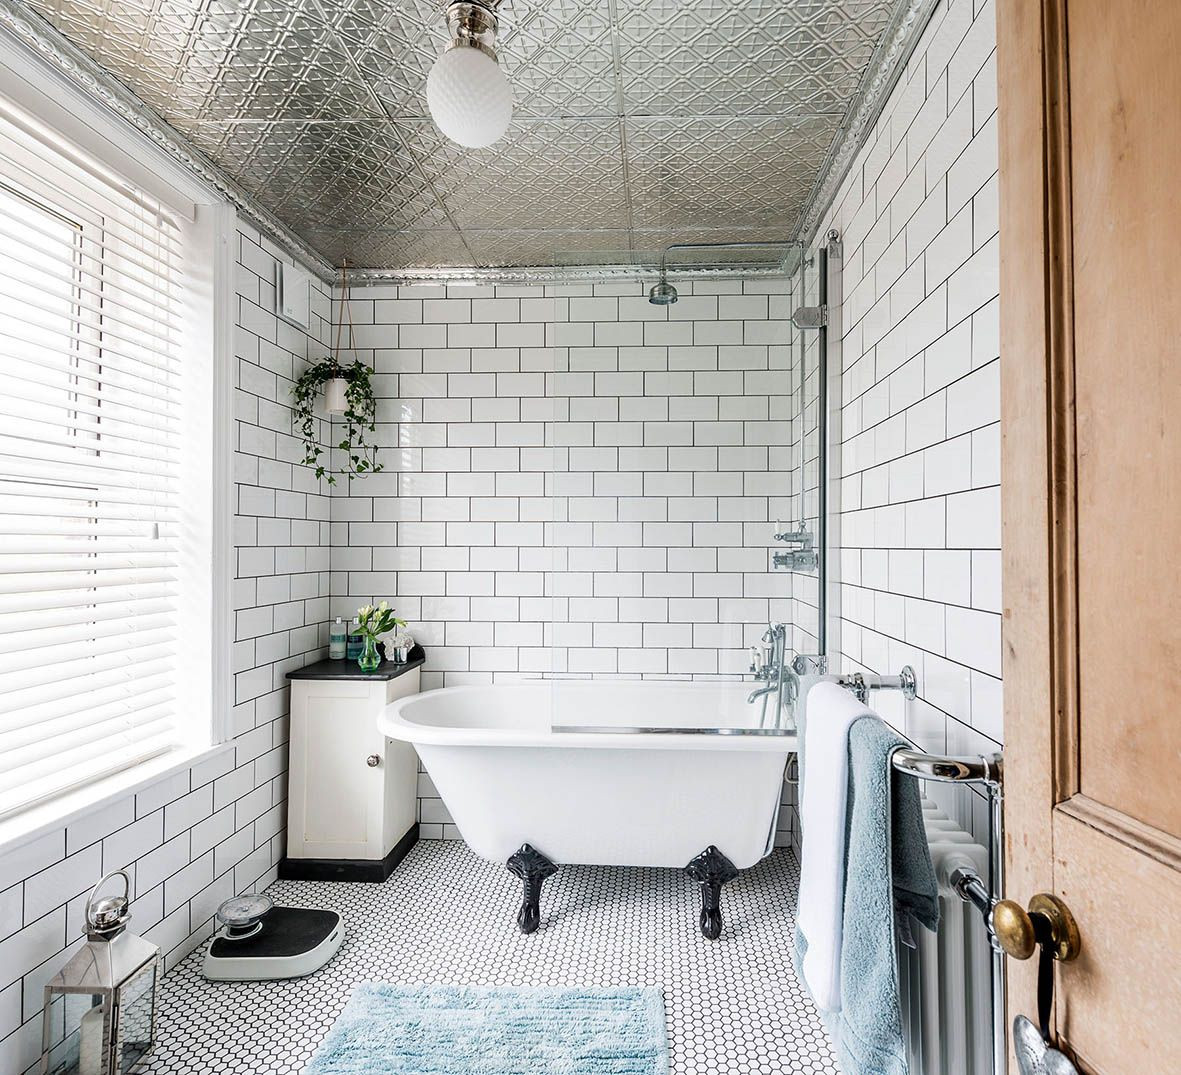 Tile Sizes For Bathrooms
 How To Pick The Right Size Tiles For A Small Bathroom